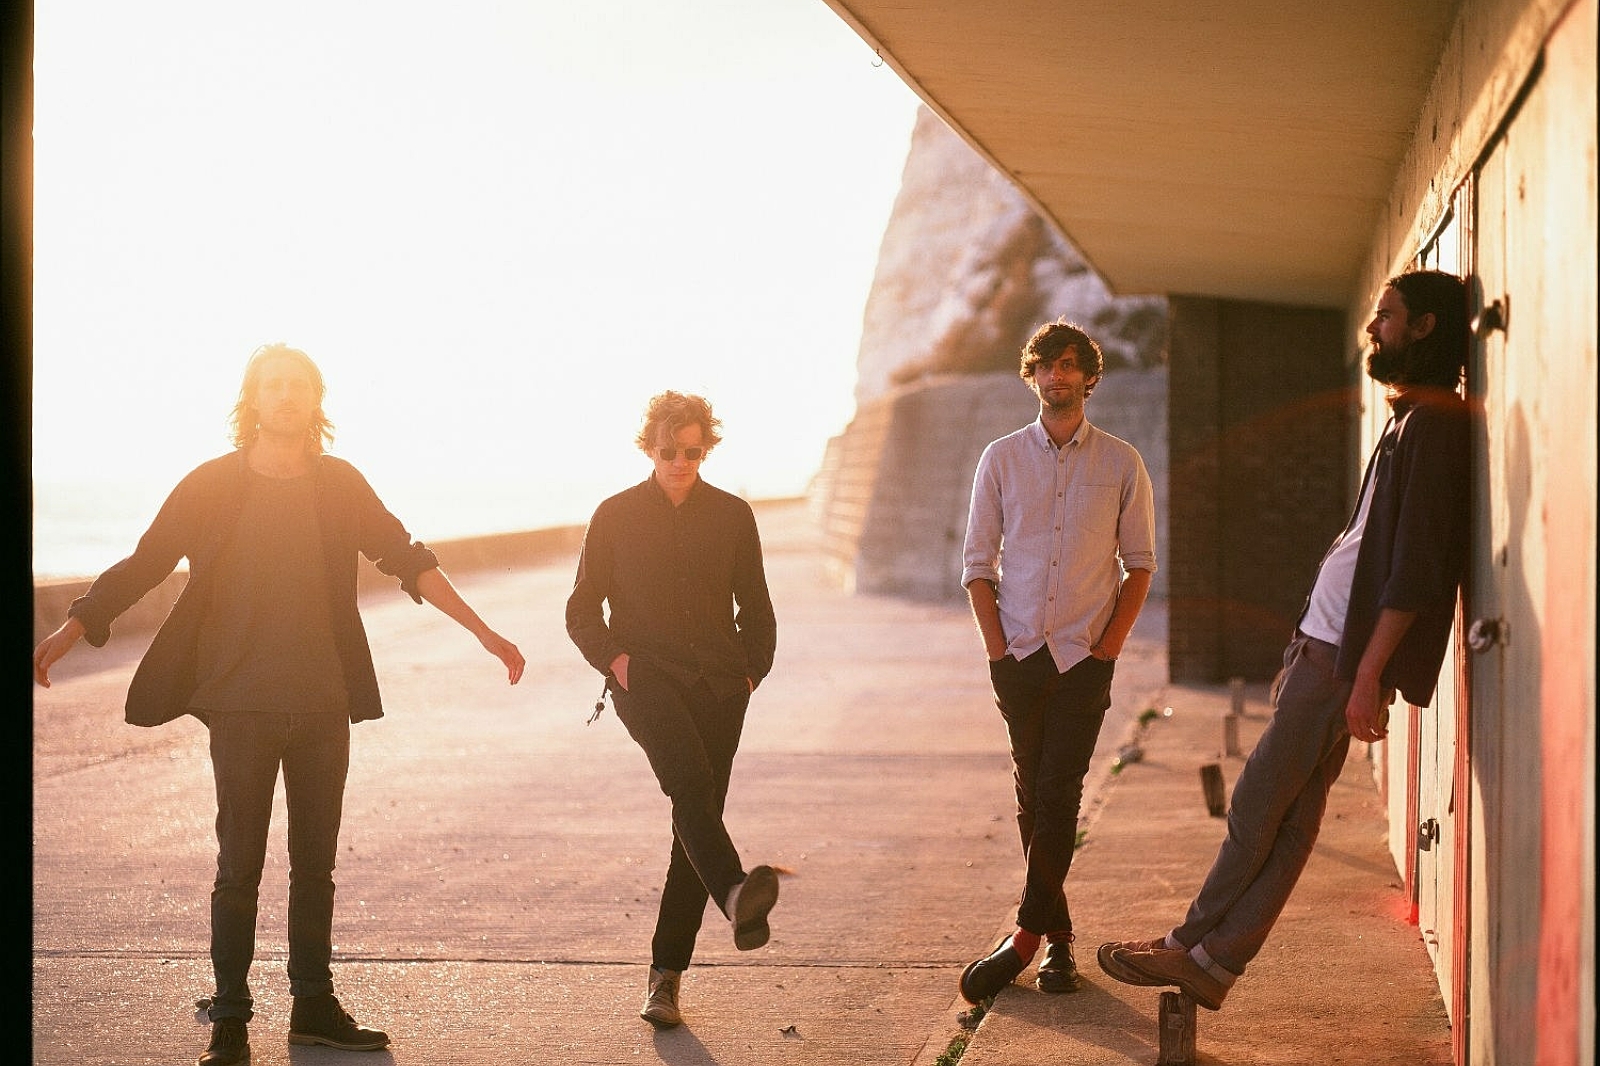 Tall Ships head for 'Home' on new single